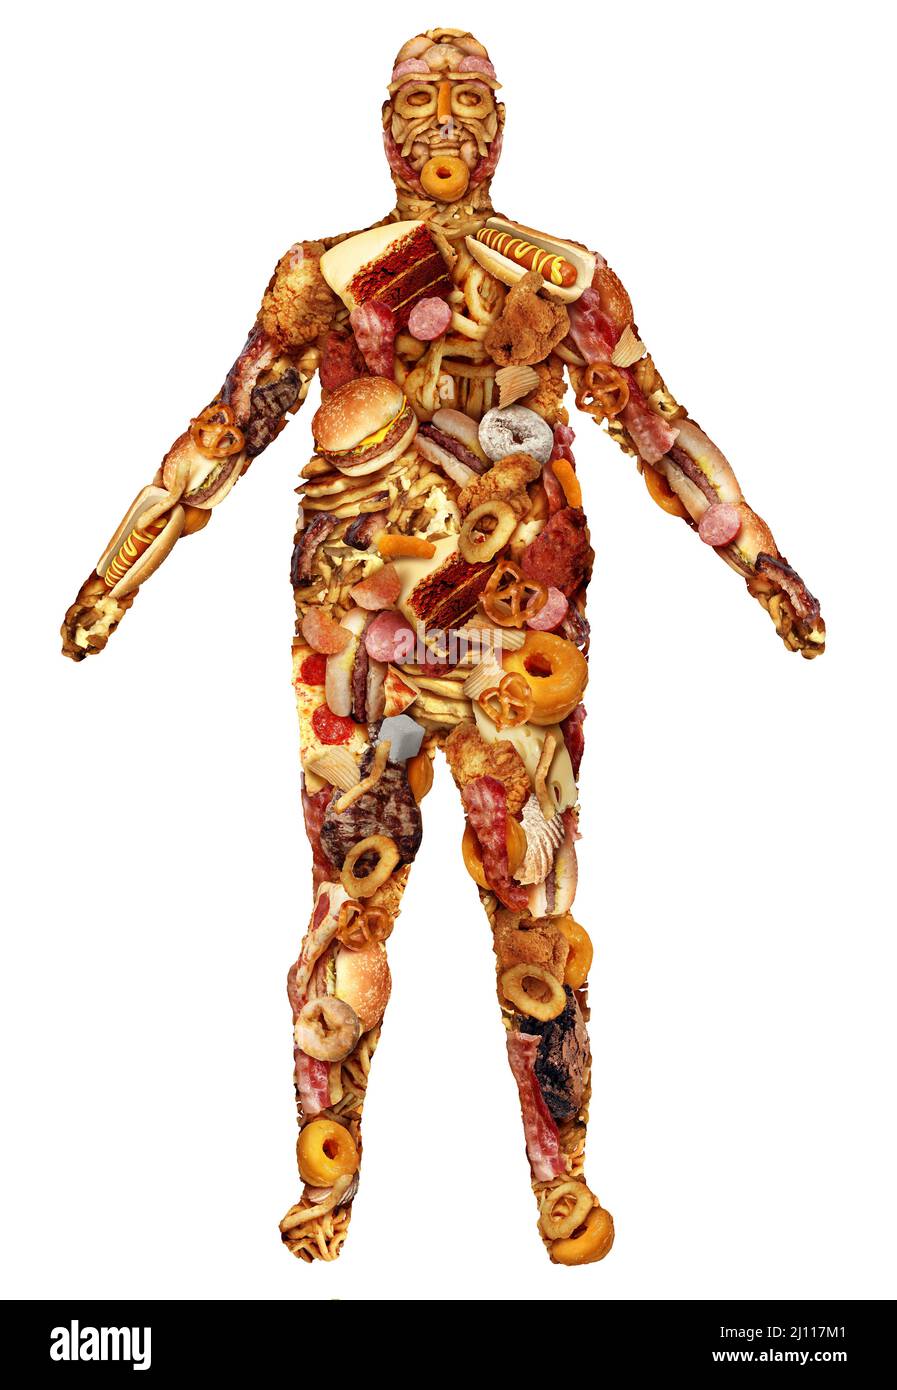 Human body made of junk food as a nutrition and dietary health problem concept as an obese person or obesity and diabetes symbol as a huge group. Stock Photo